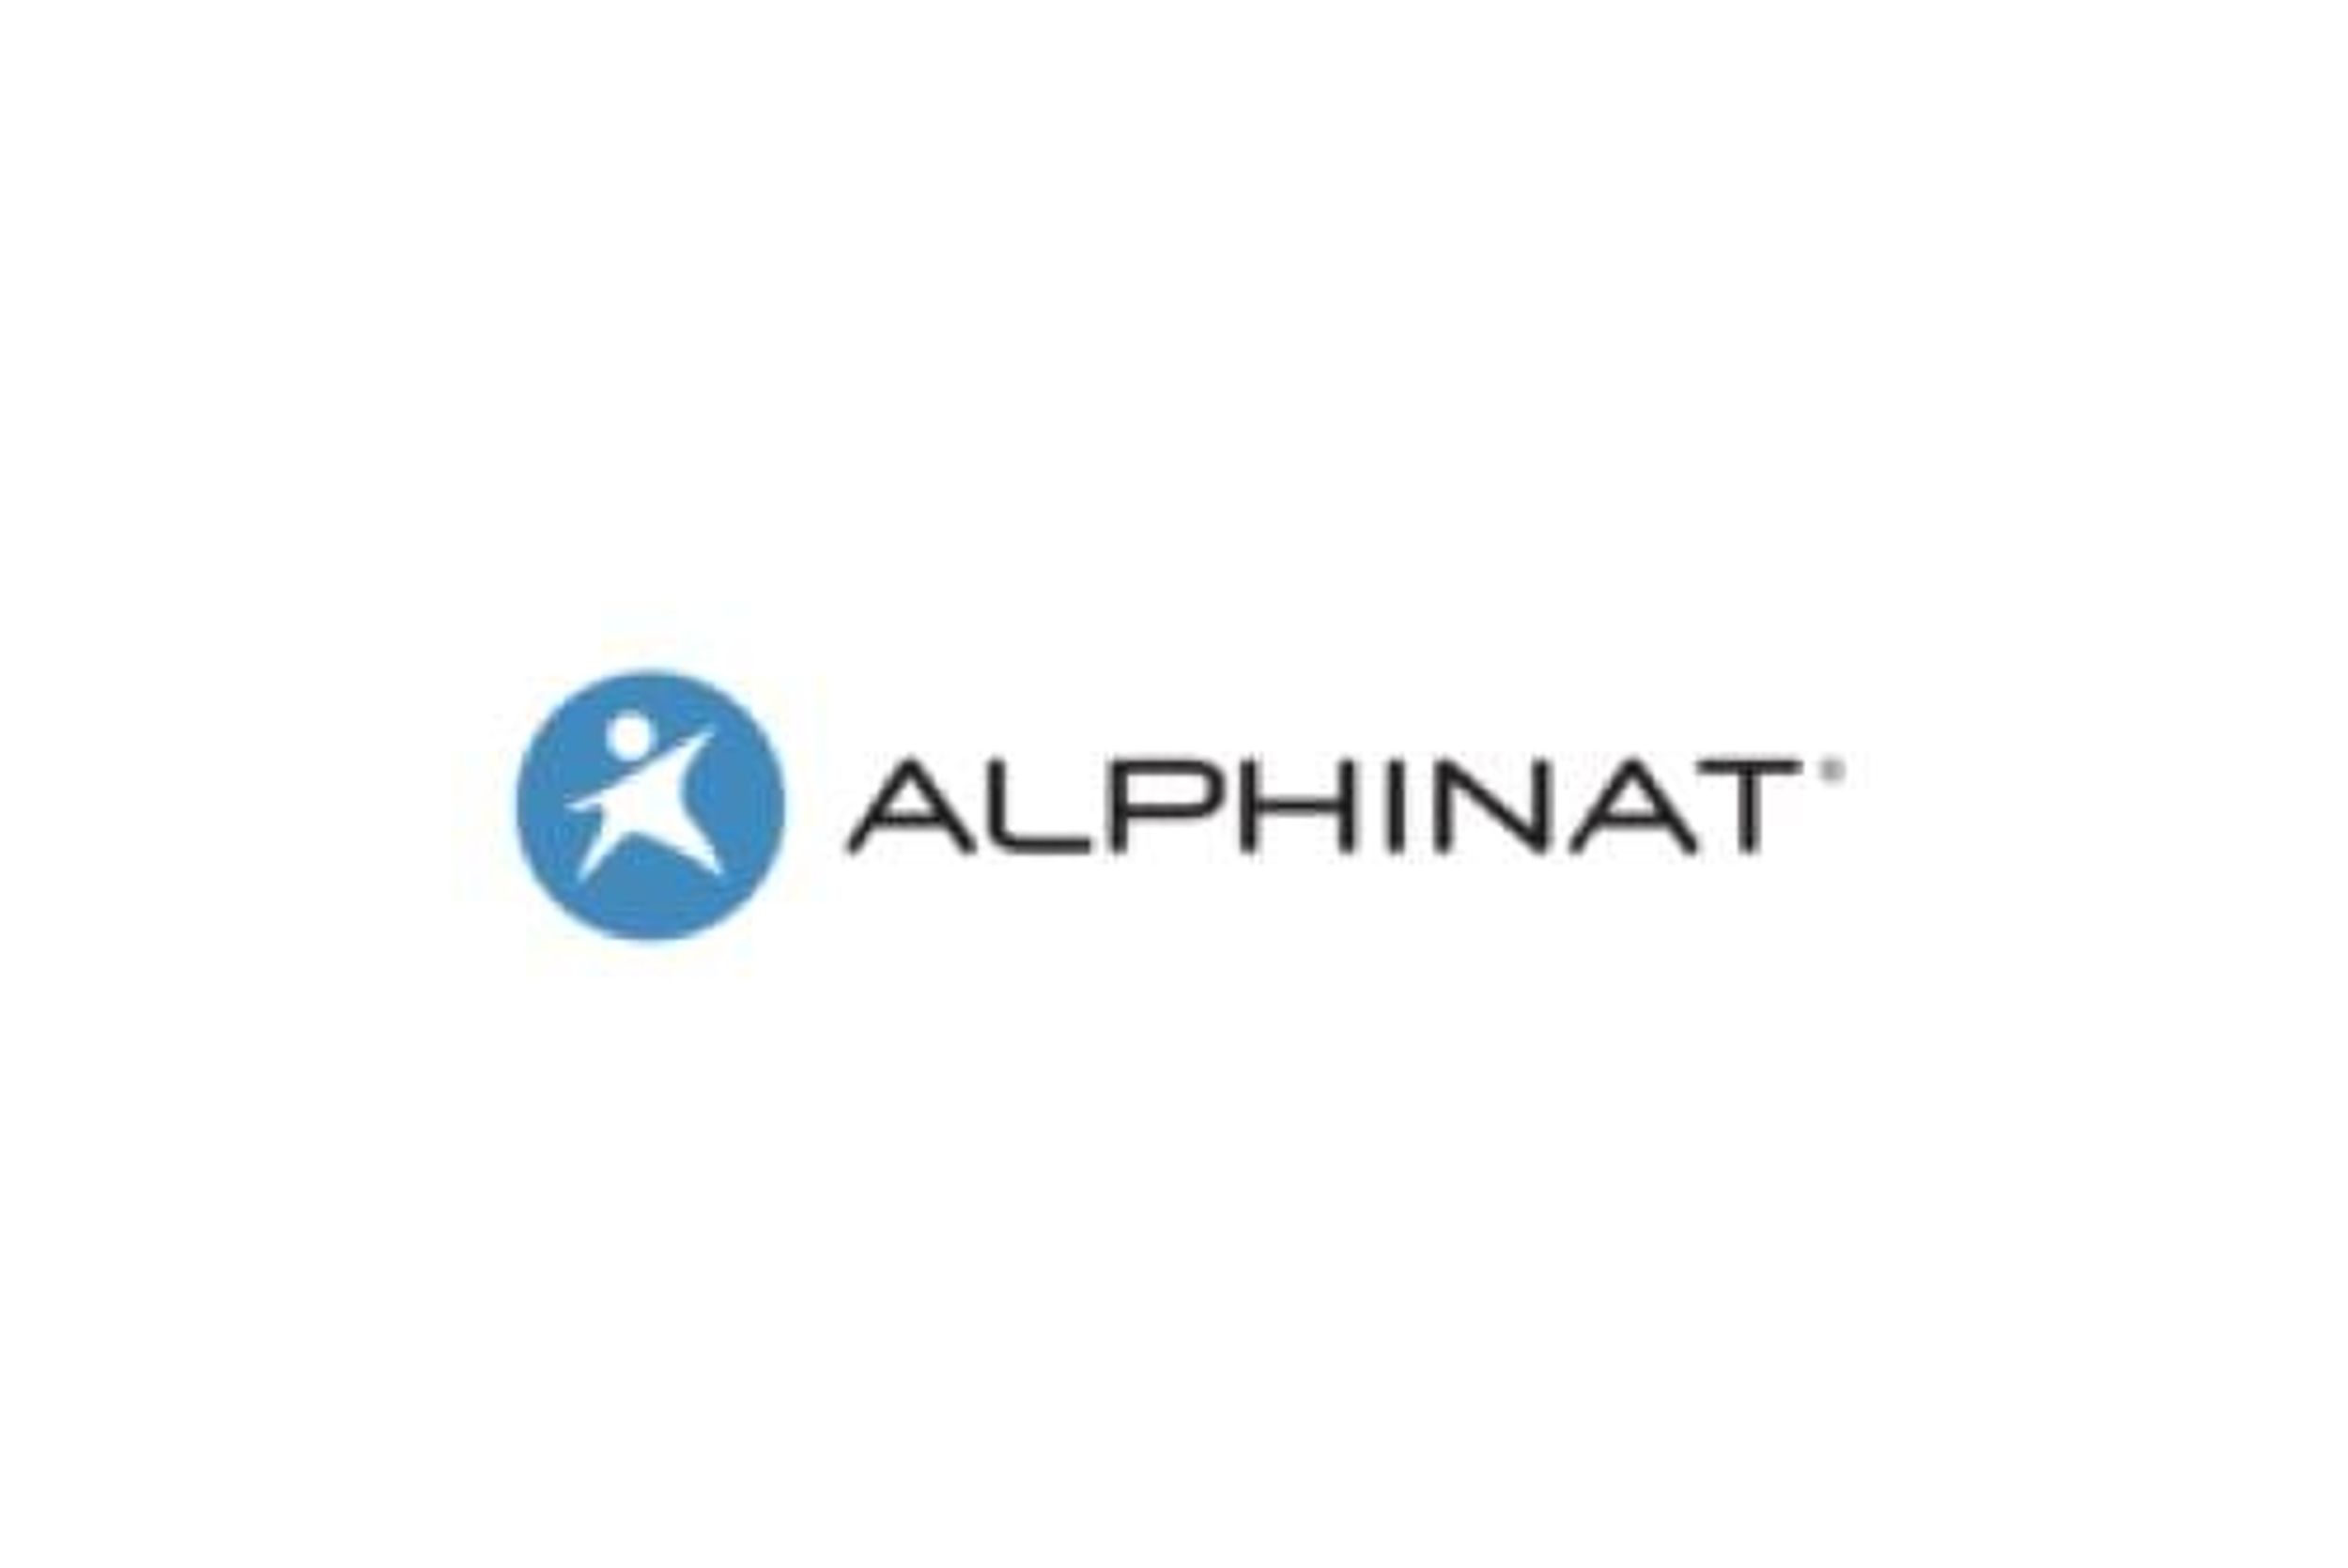 Alphinat Announces a Loss of $85,157 for Fiscal Quarter Ended Feburary 28, 2022